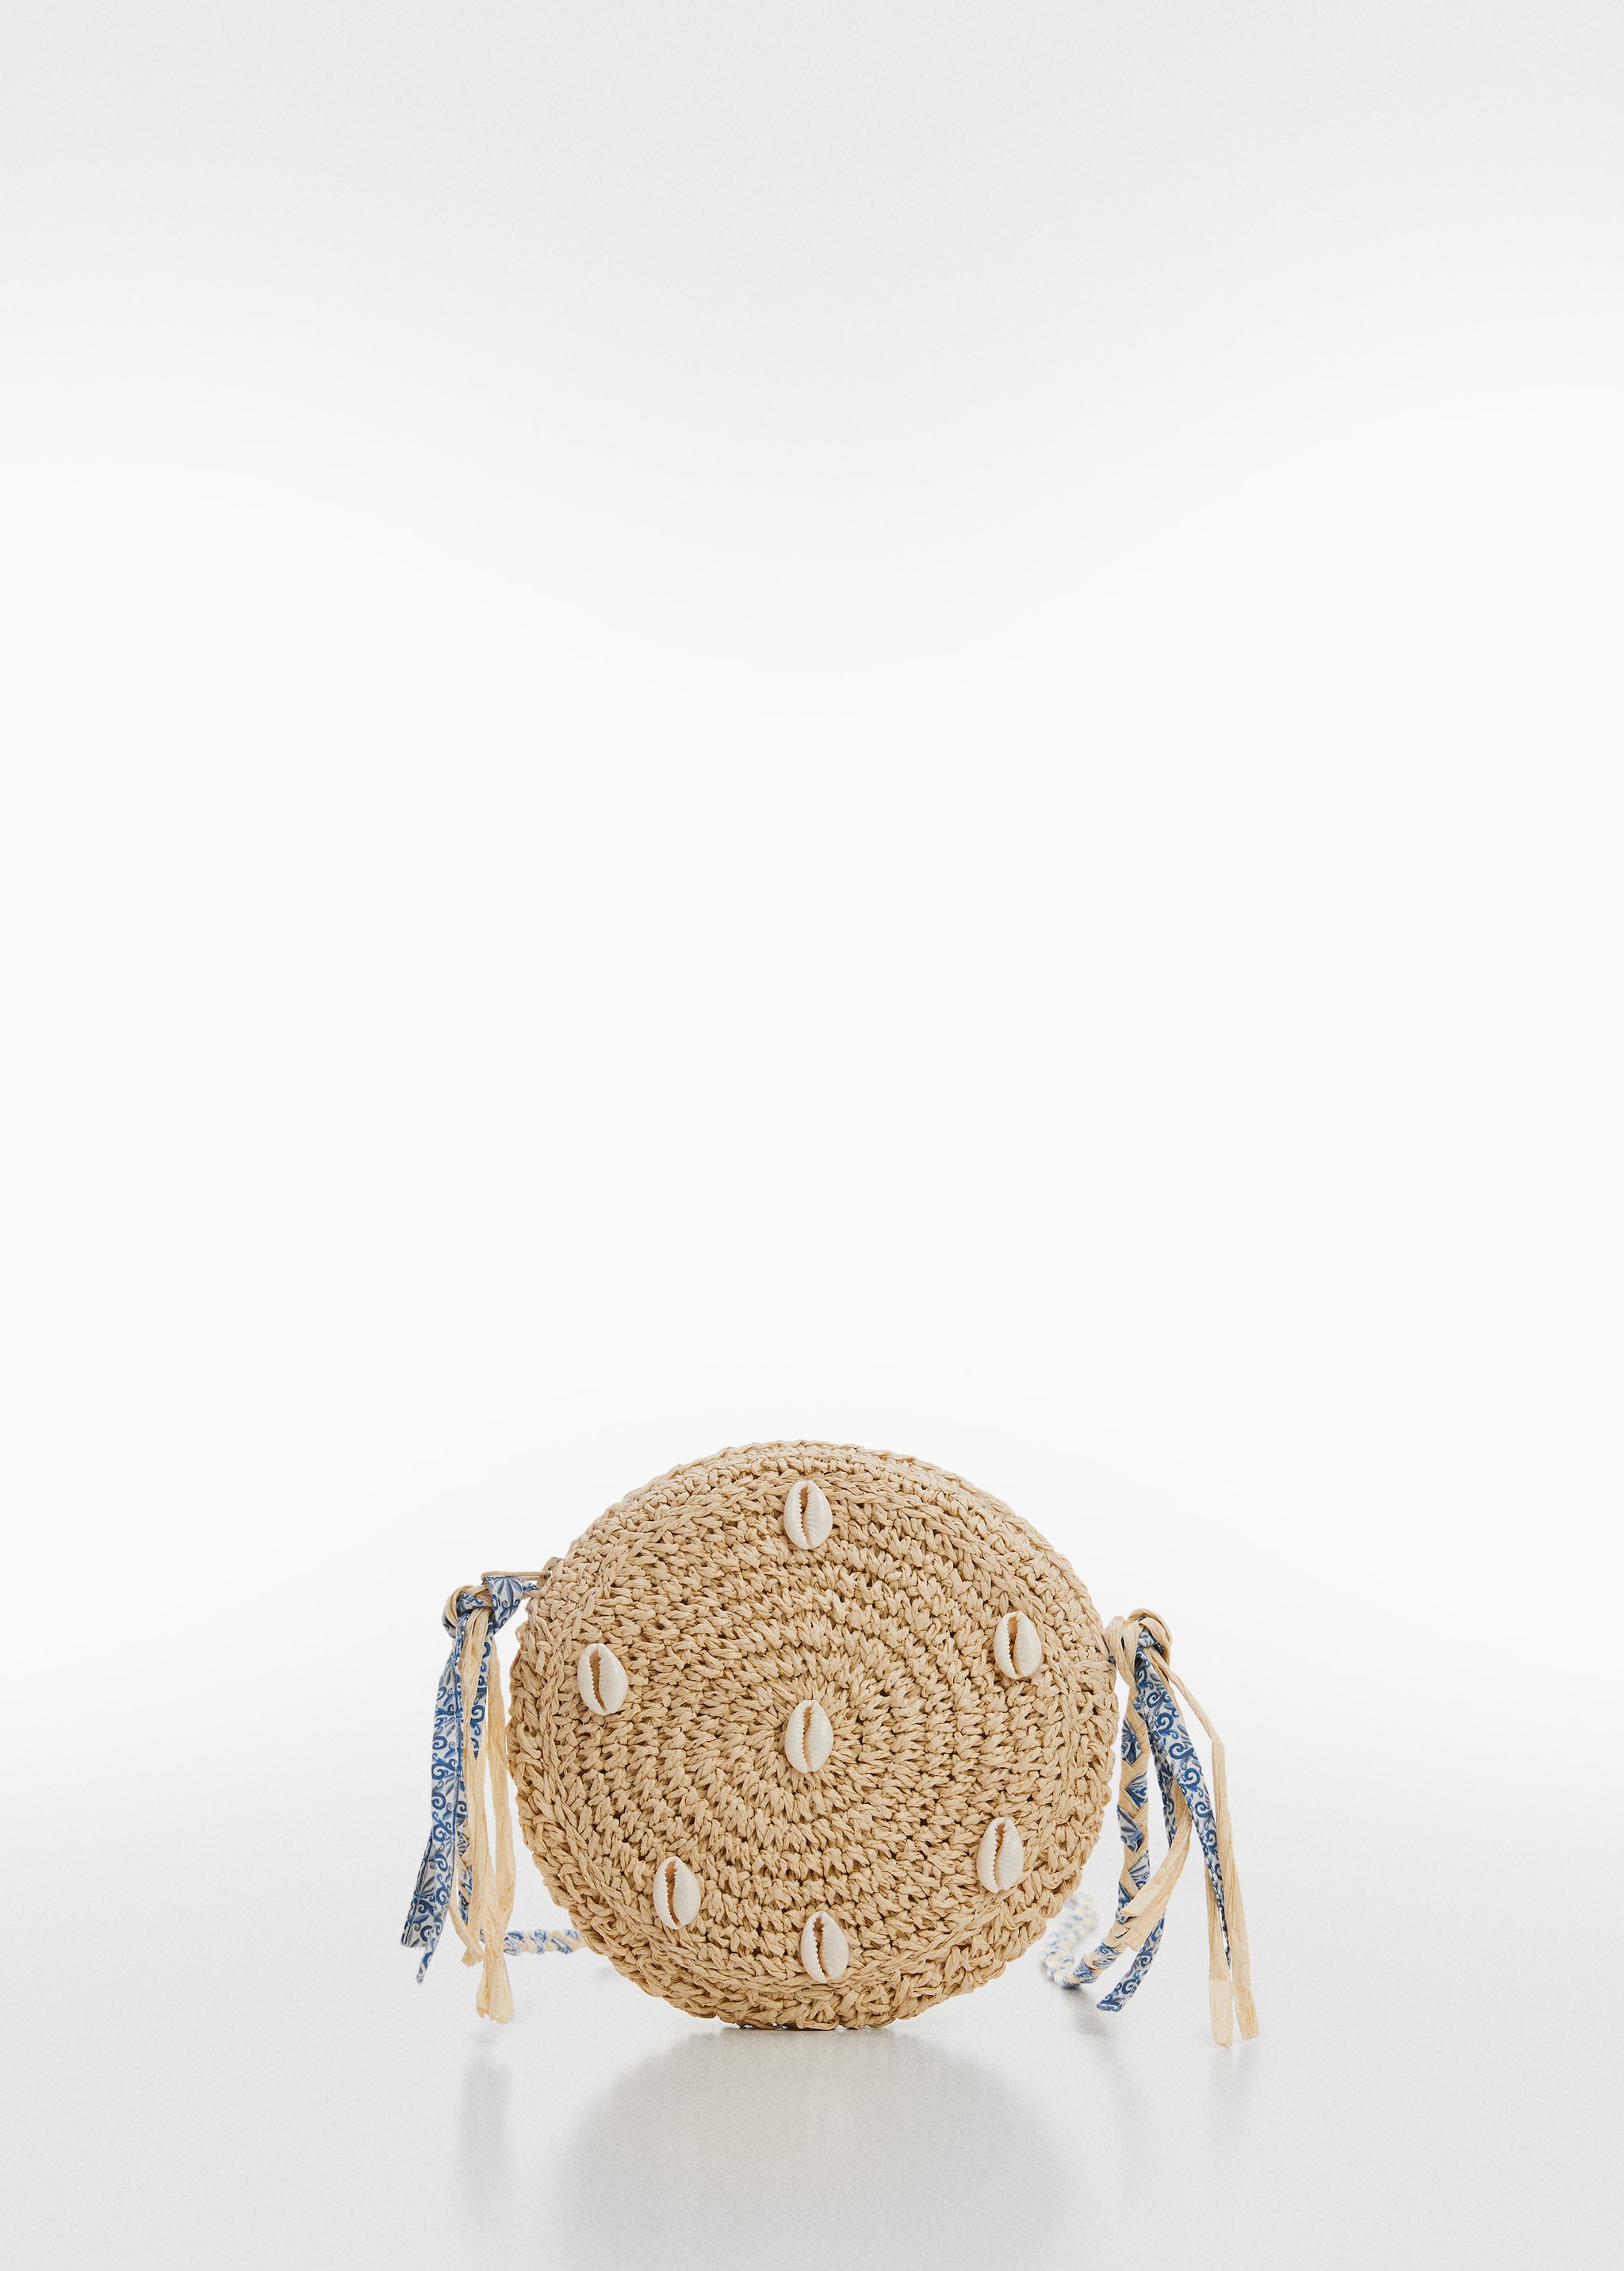 Shell straw bag - Article without model